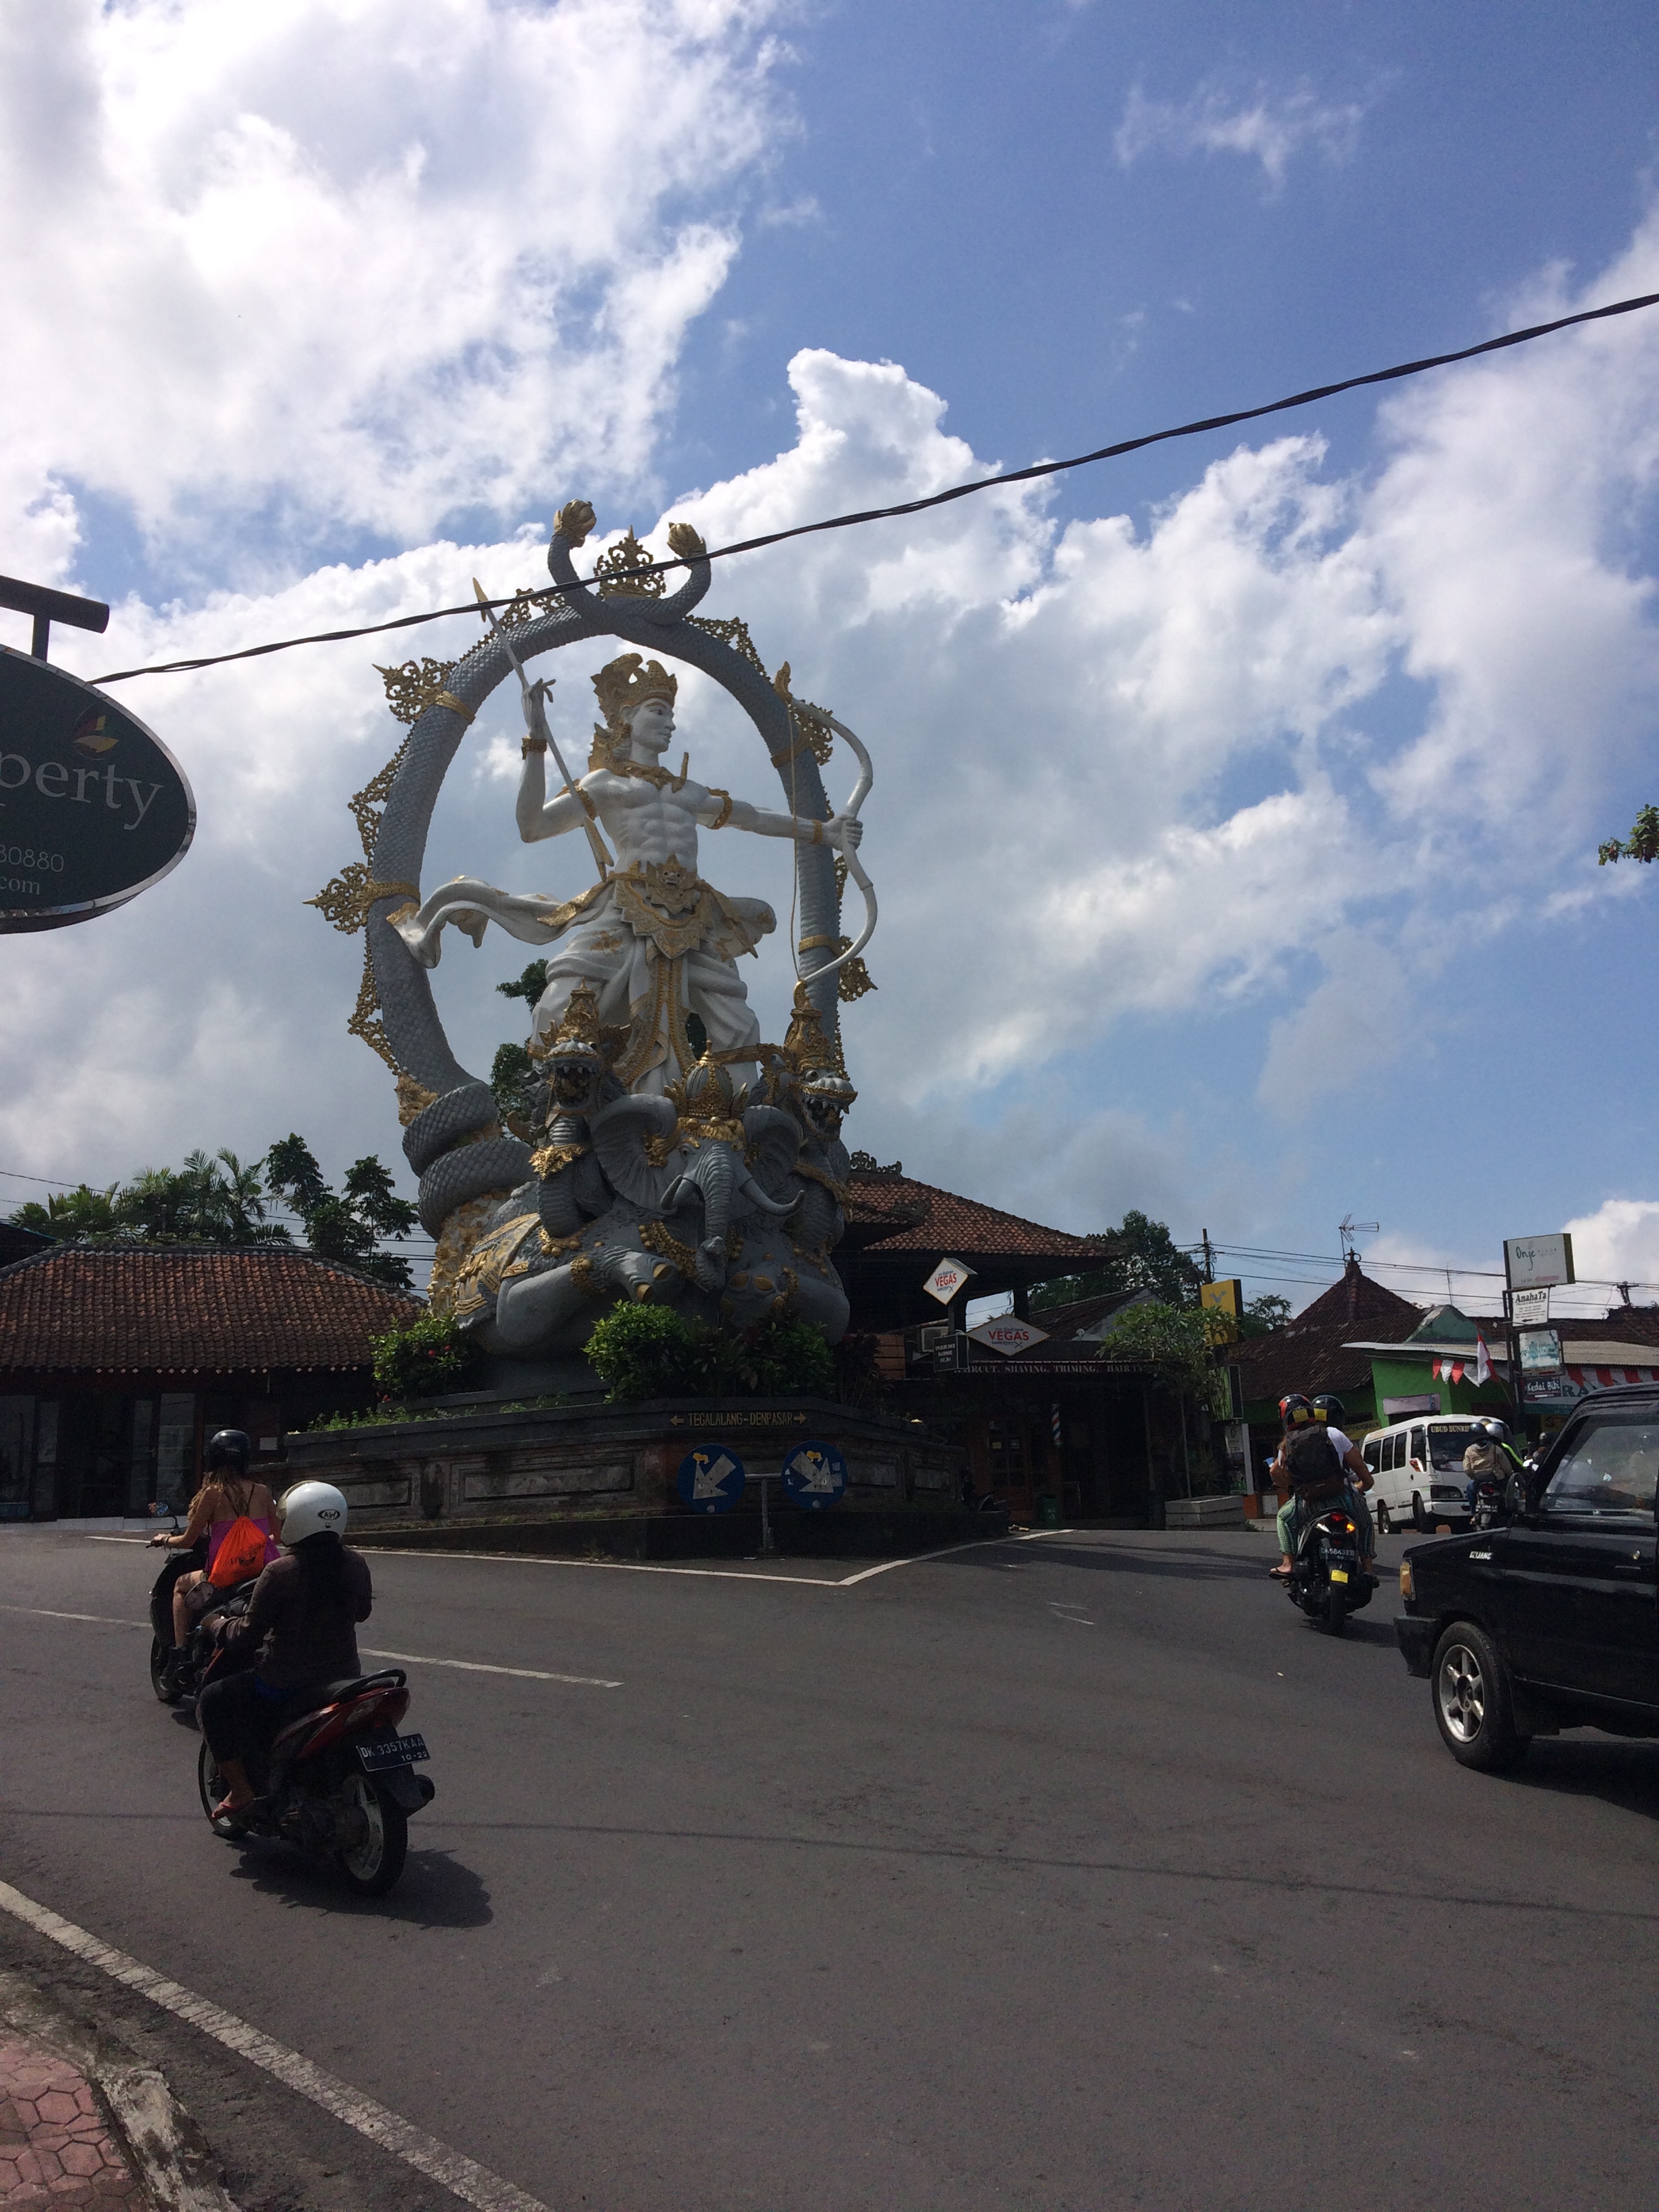 Photo of a giant Hindu statue in the middle of an intersection at the top of the main road in Ubud - the statue is gold and white, a humanoid figure holding a bow and arrow